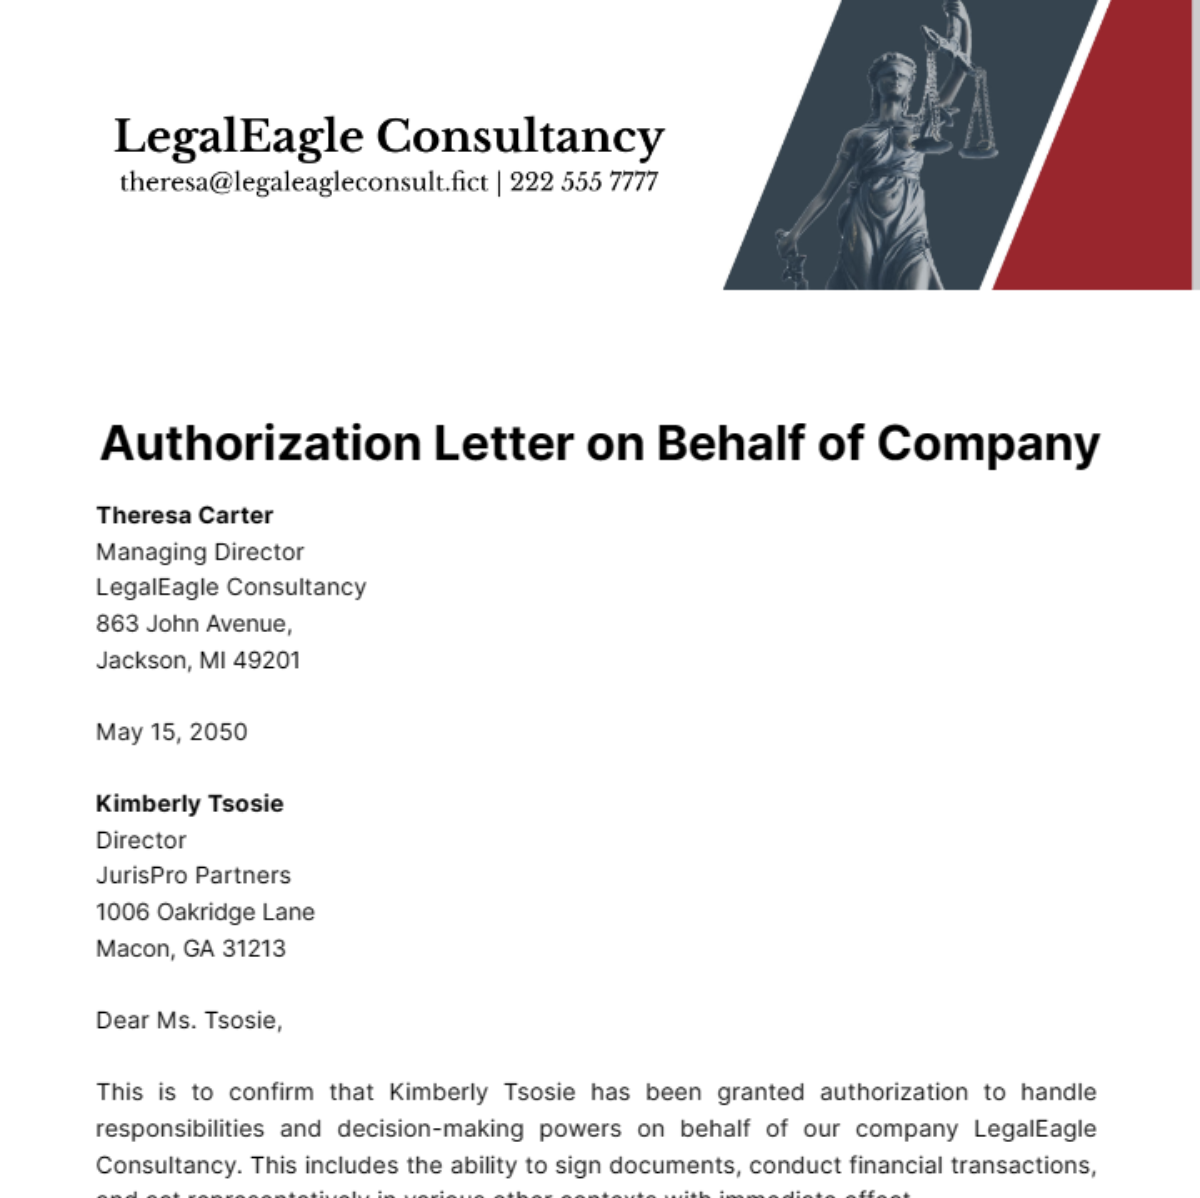 Authorization Letter Behalf of Company Template